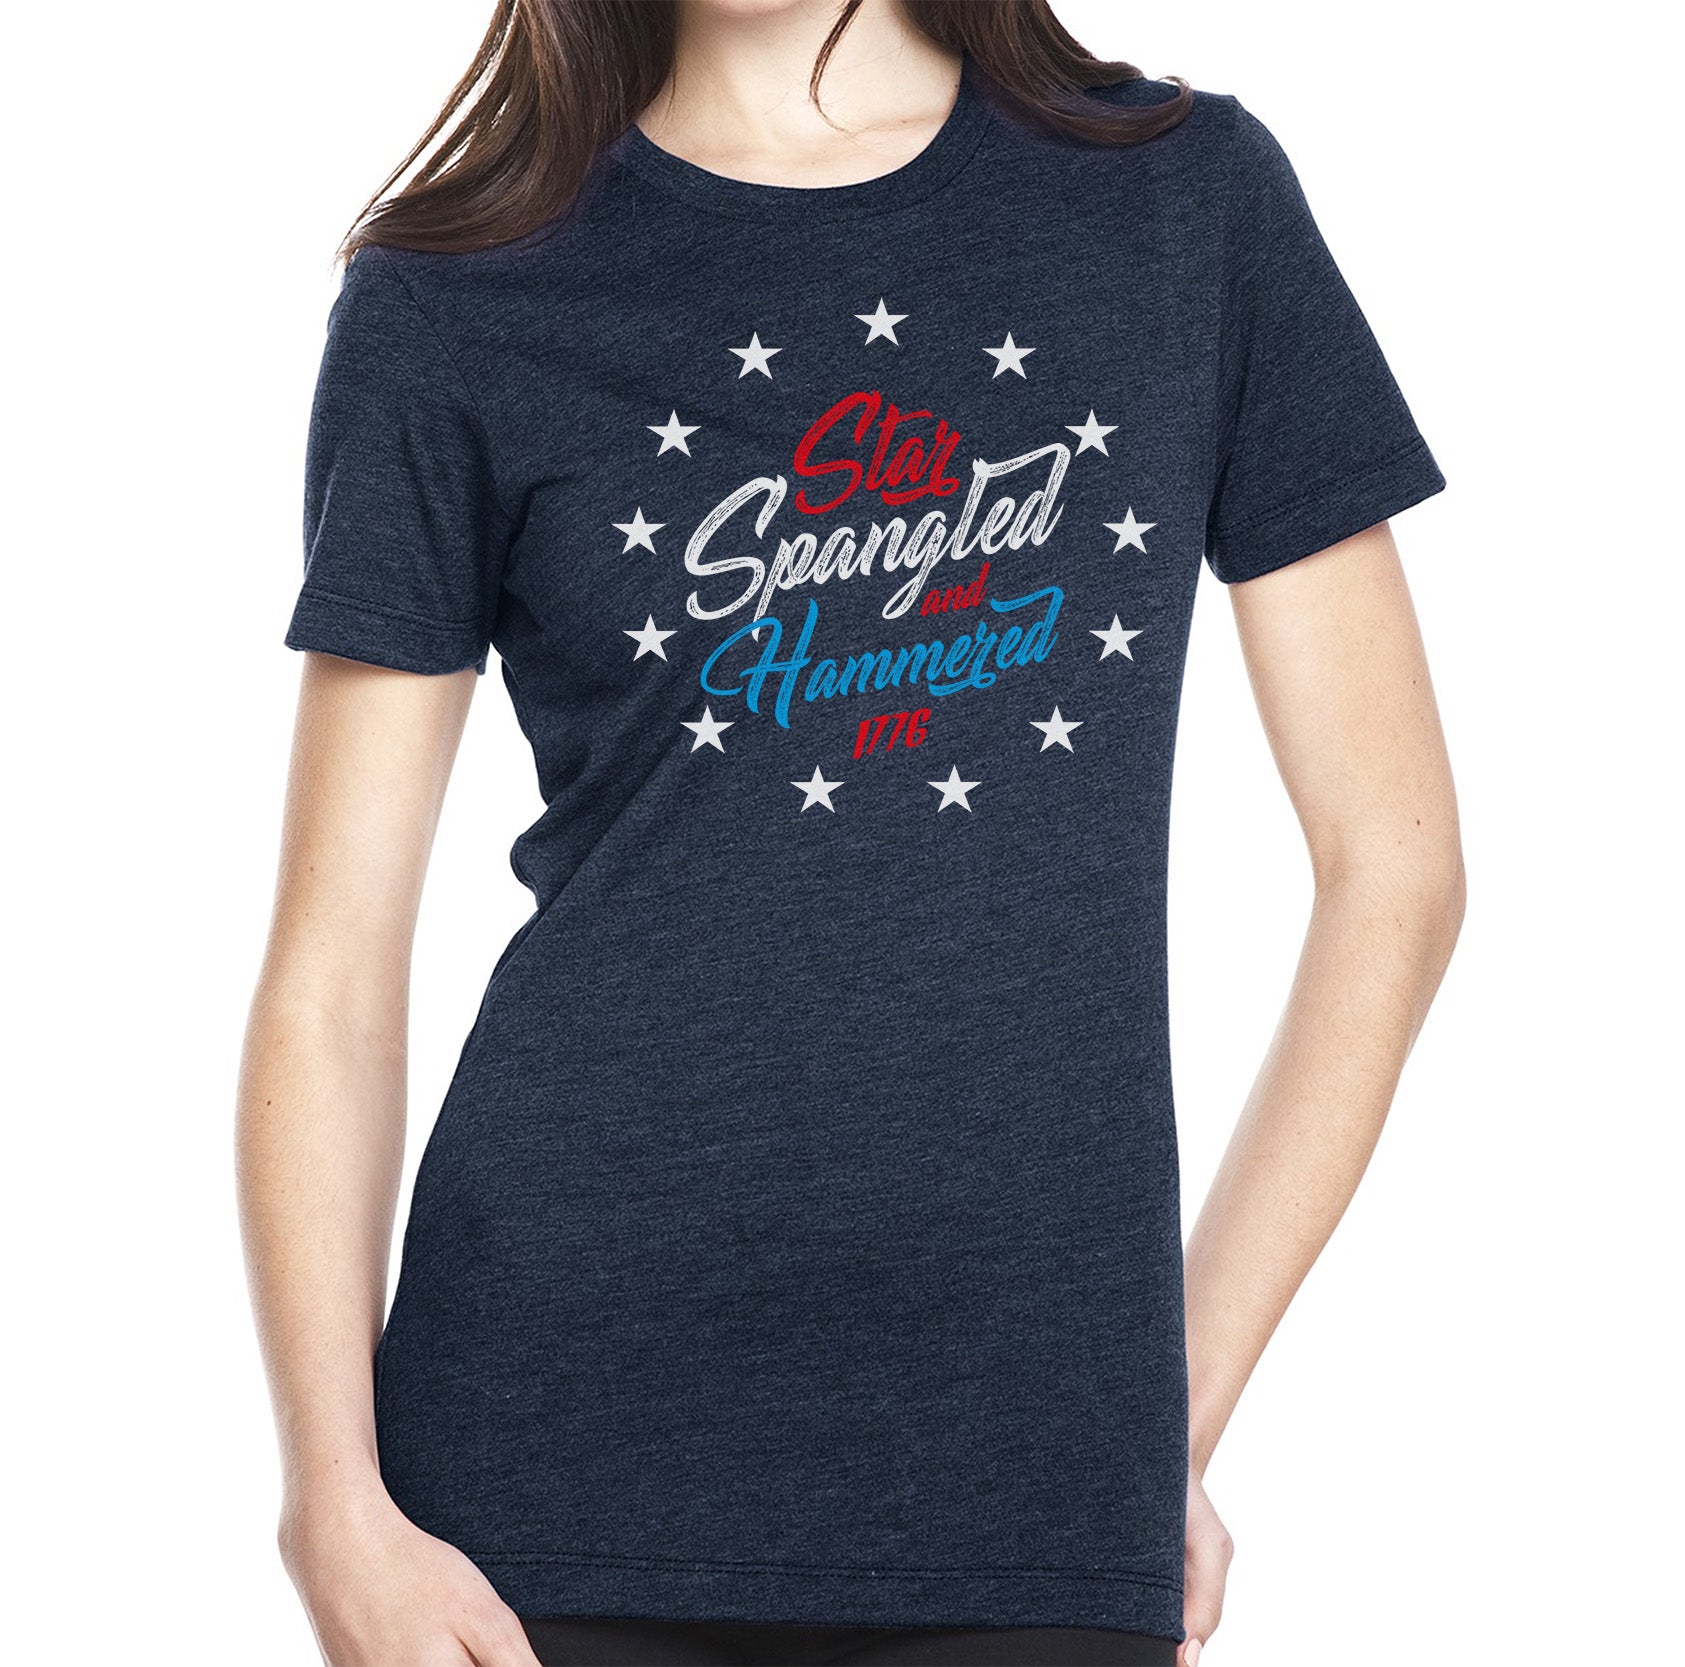 Star Spangled and Hammered 1776 - Ladies Tee